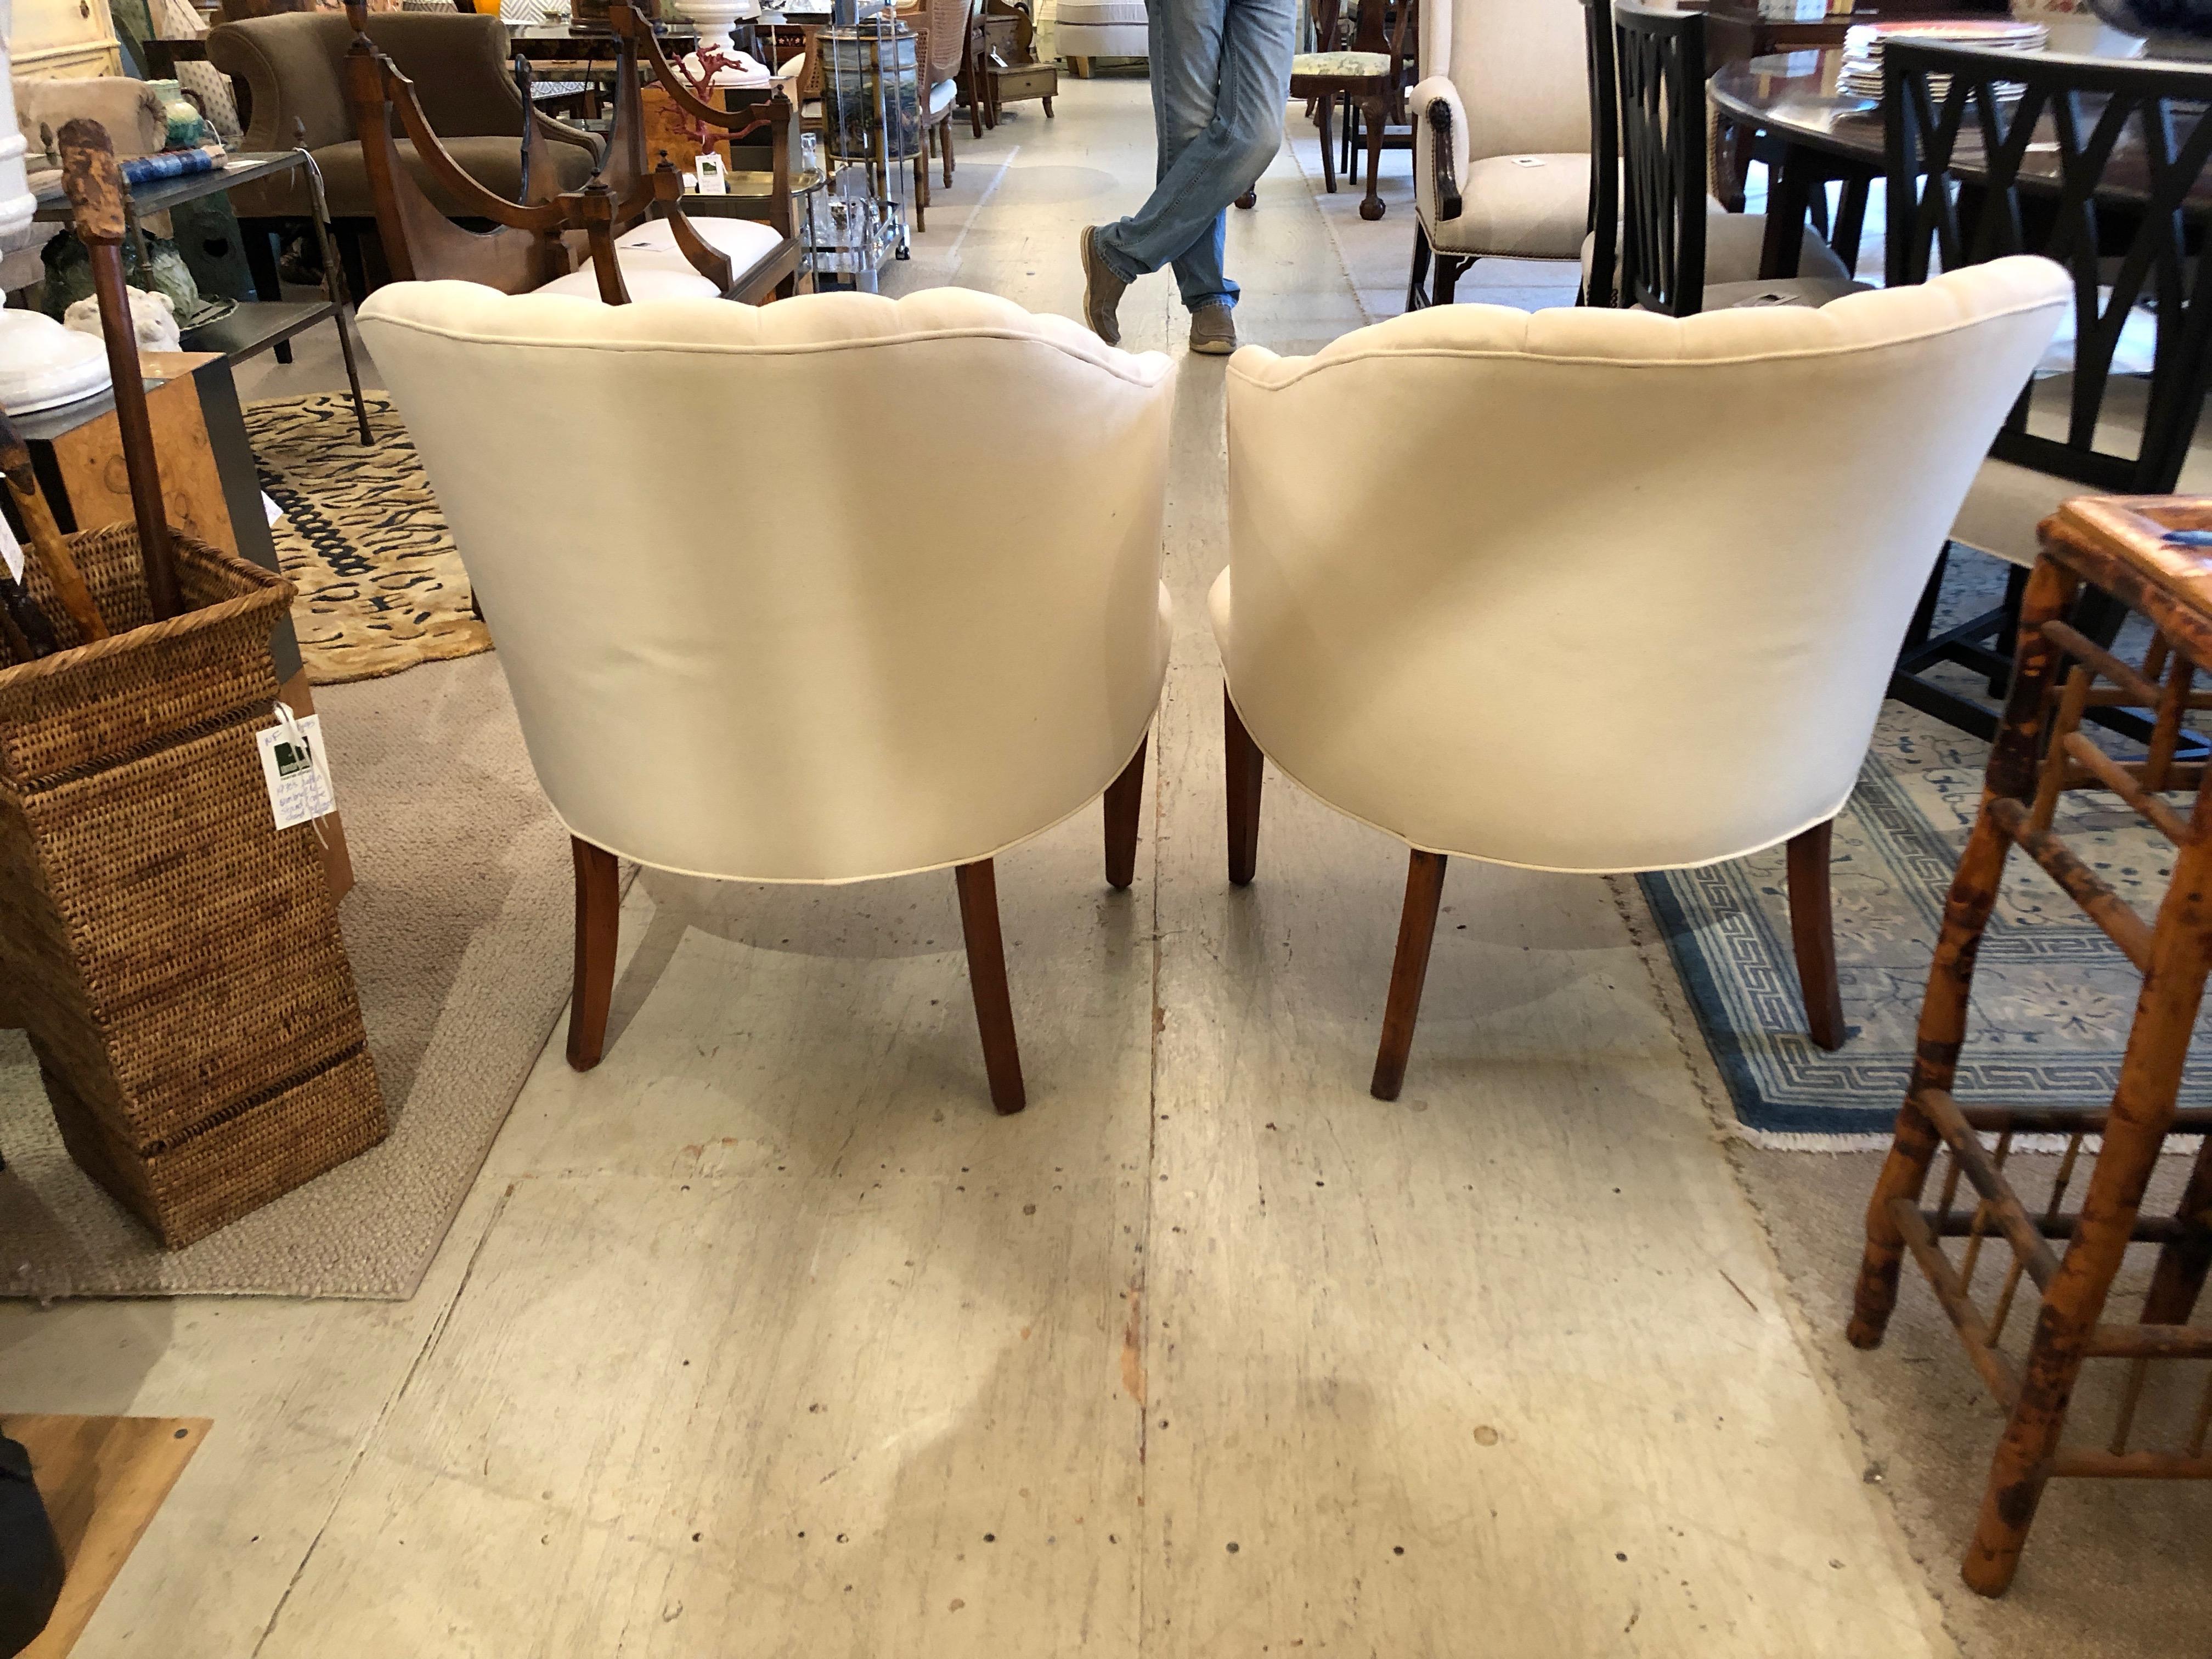 Stunning pair of newly upholstered vintage channel back club chairs having tapered mahogany legs.
Measures: seat height 16.5, seat depth 19.5.